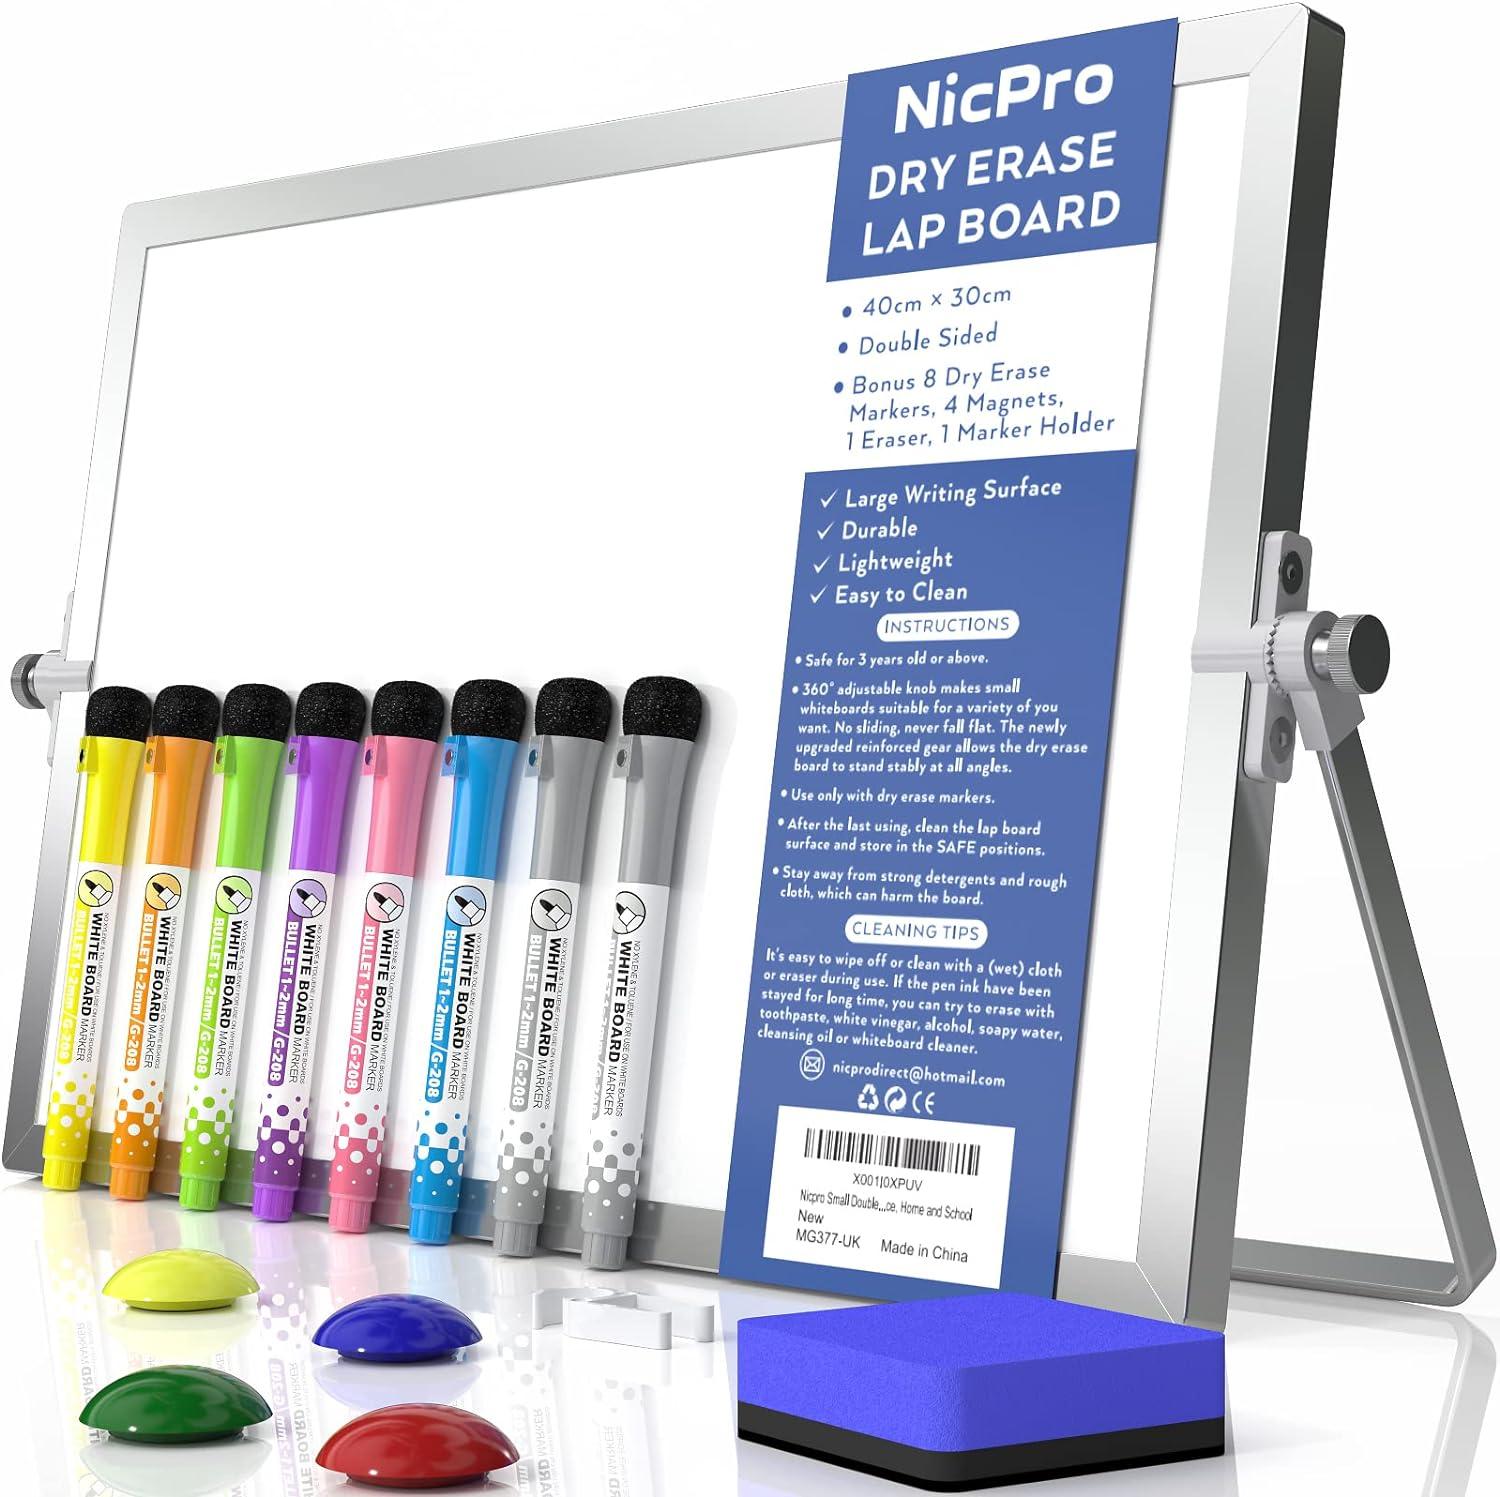 nicpro dry erase mini whiteboard a3 40 x 30 cm double sided small magnetic desktop whiteboard with stand 8